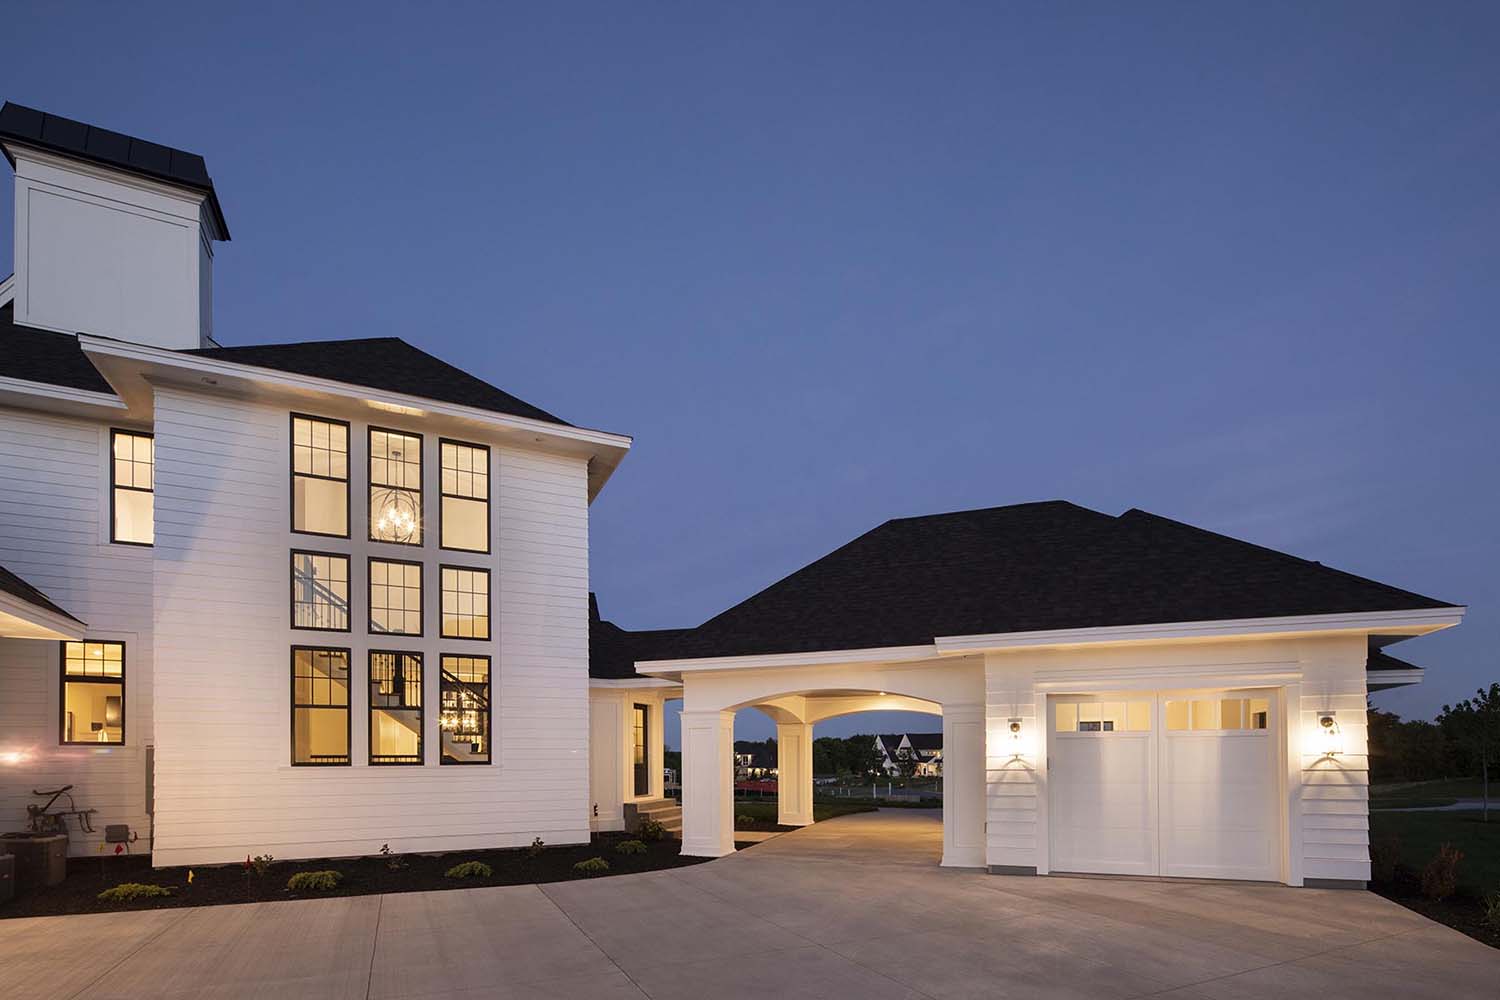 transitional style home exterior with a garage